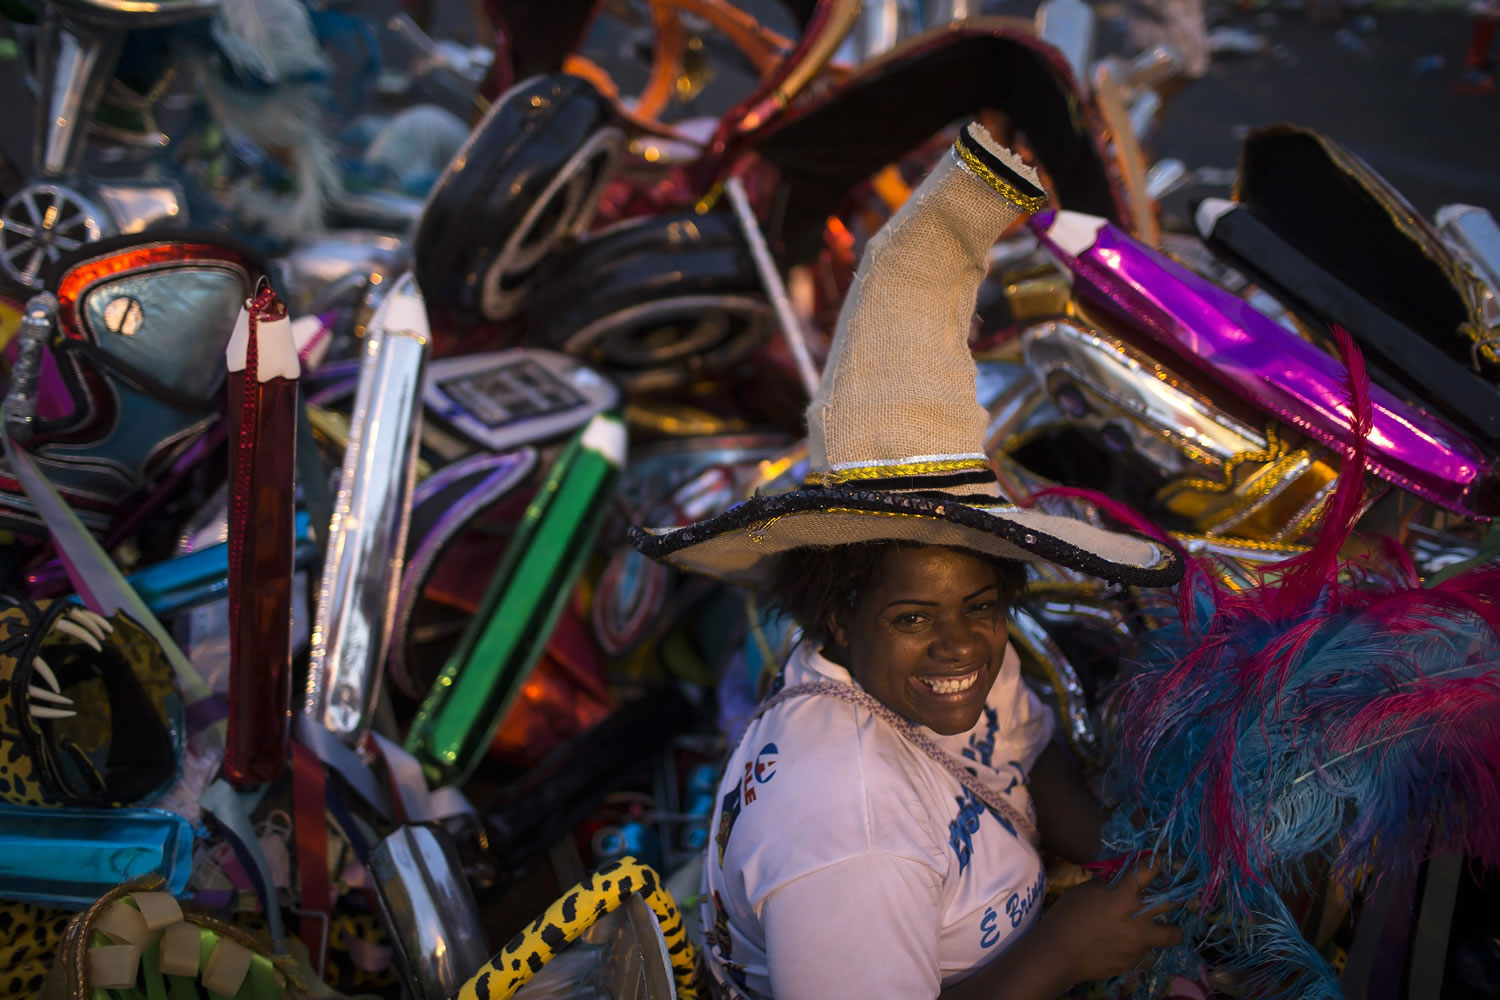 Elaine da Silva Moraes stands amid discarded costumes after carnival celebrations at the Sambadrome on Tuesday in Rio de Janeiro, Brazil.